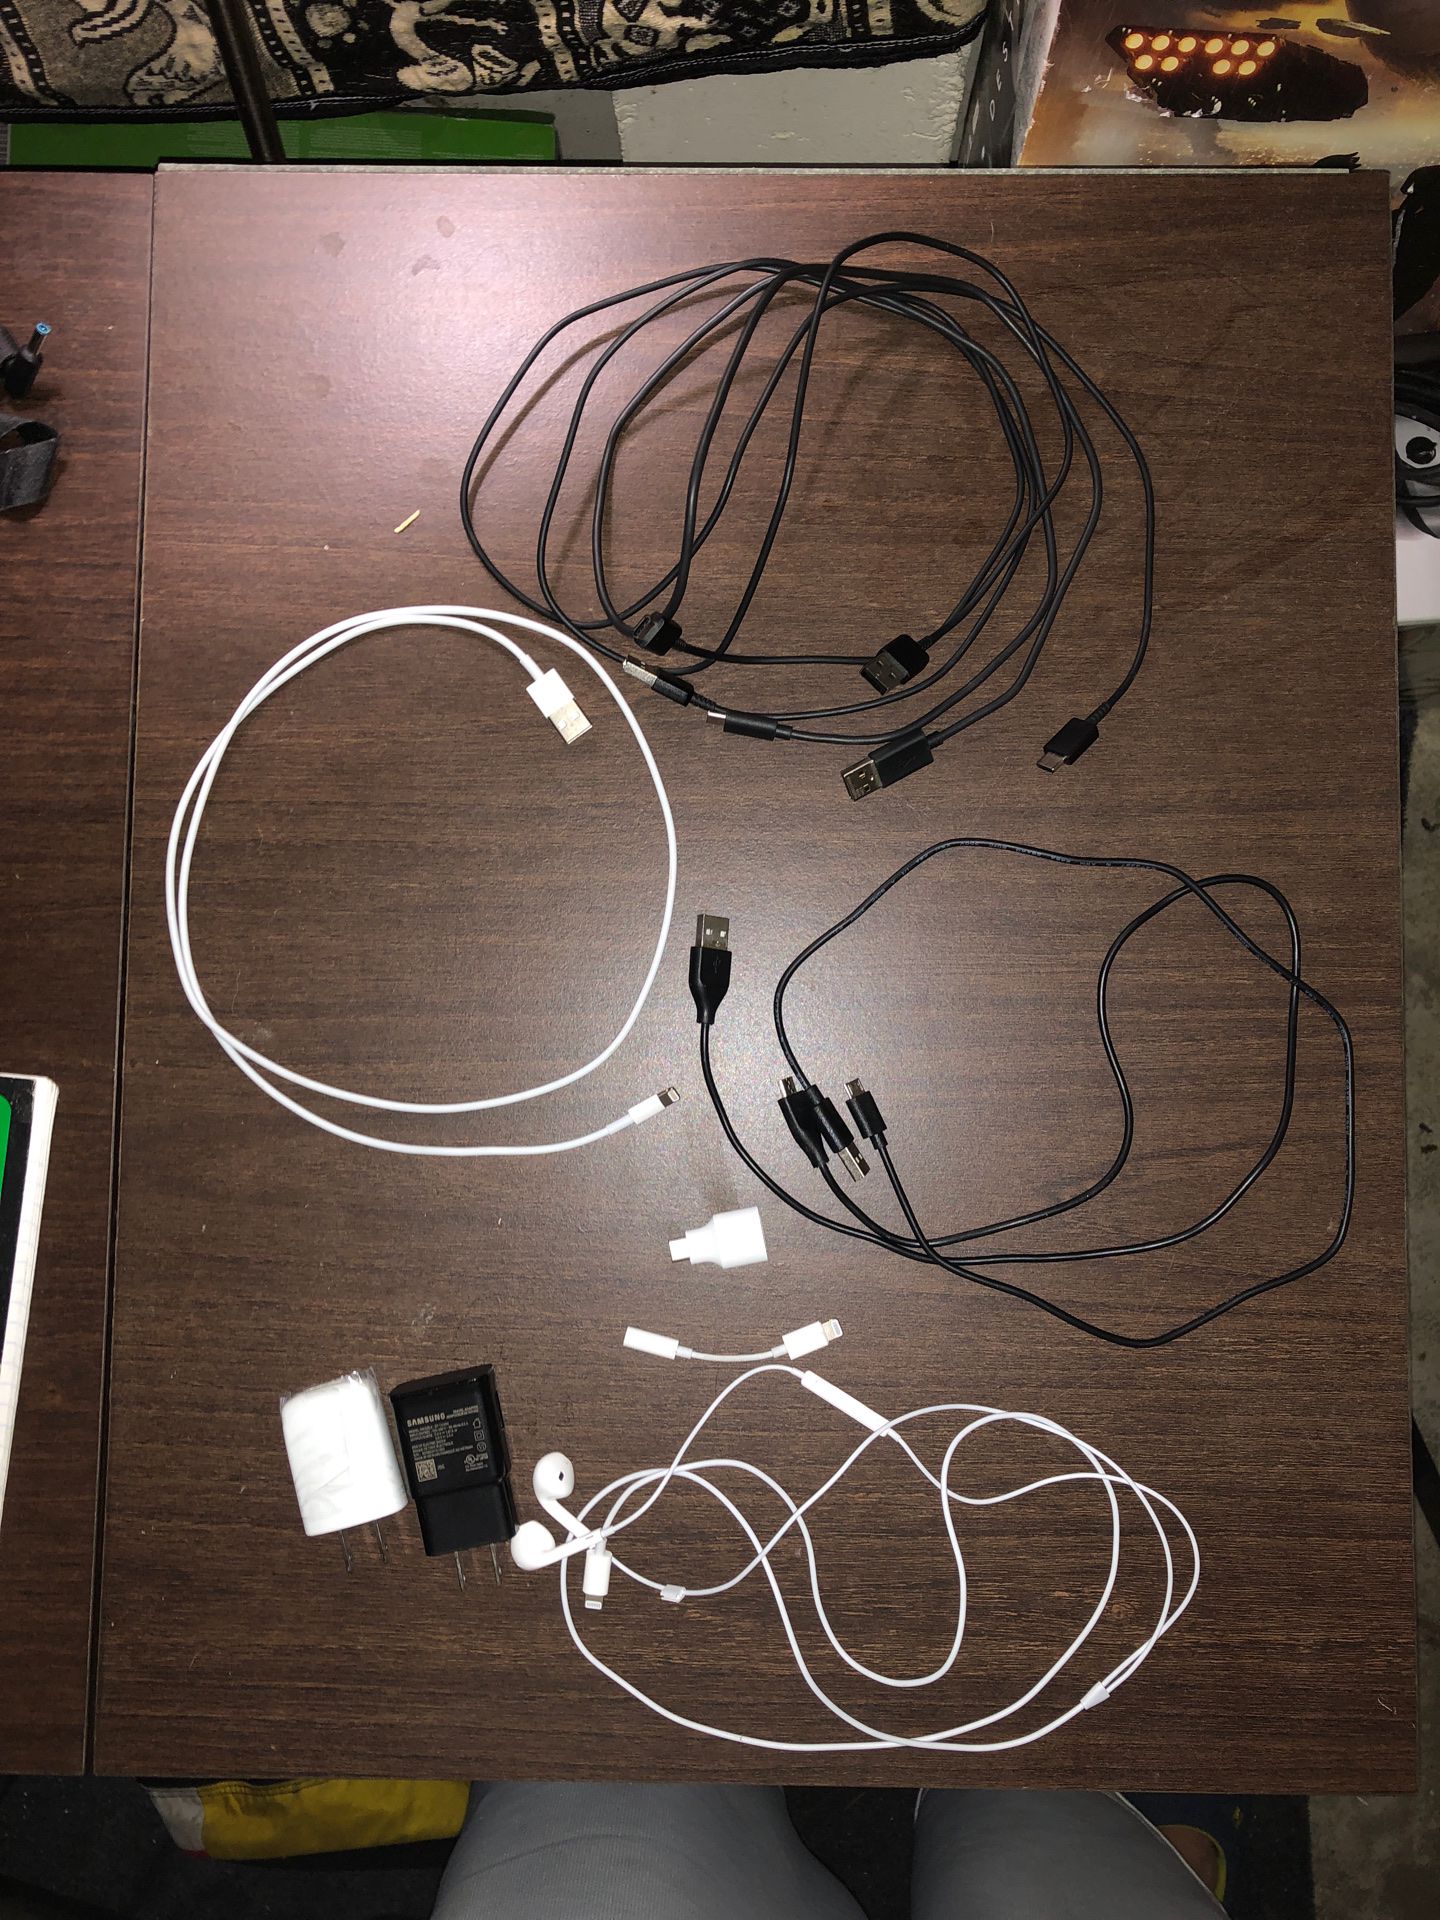 Accessories (Cables, headphones, dongles, adapters)